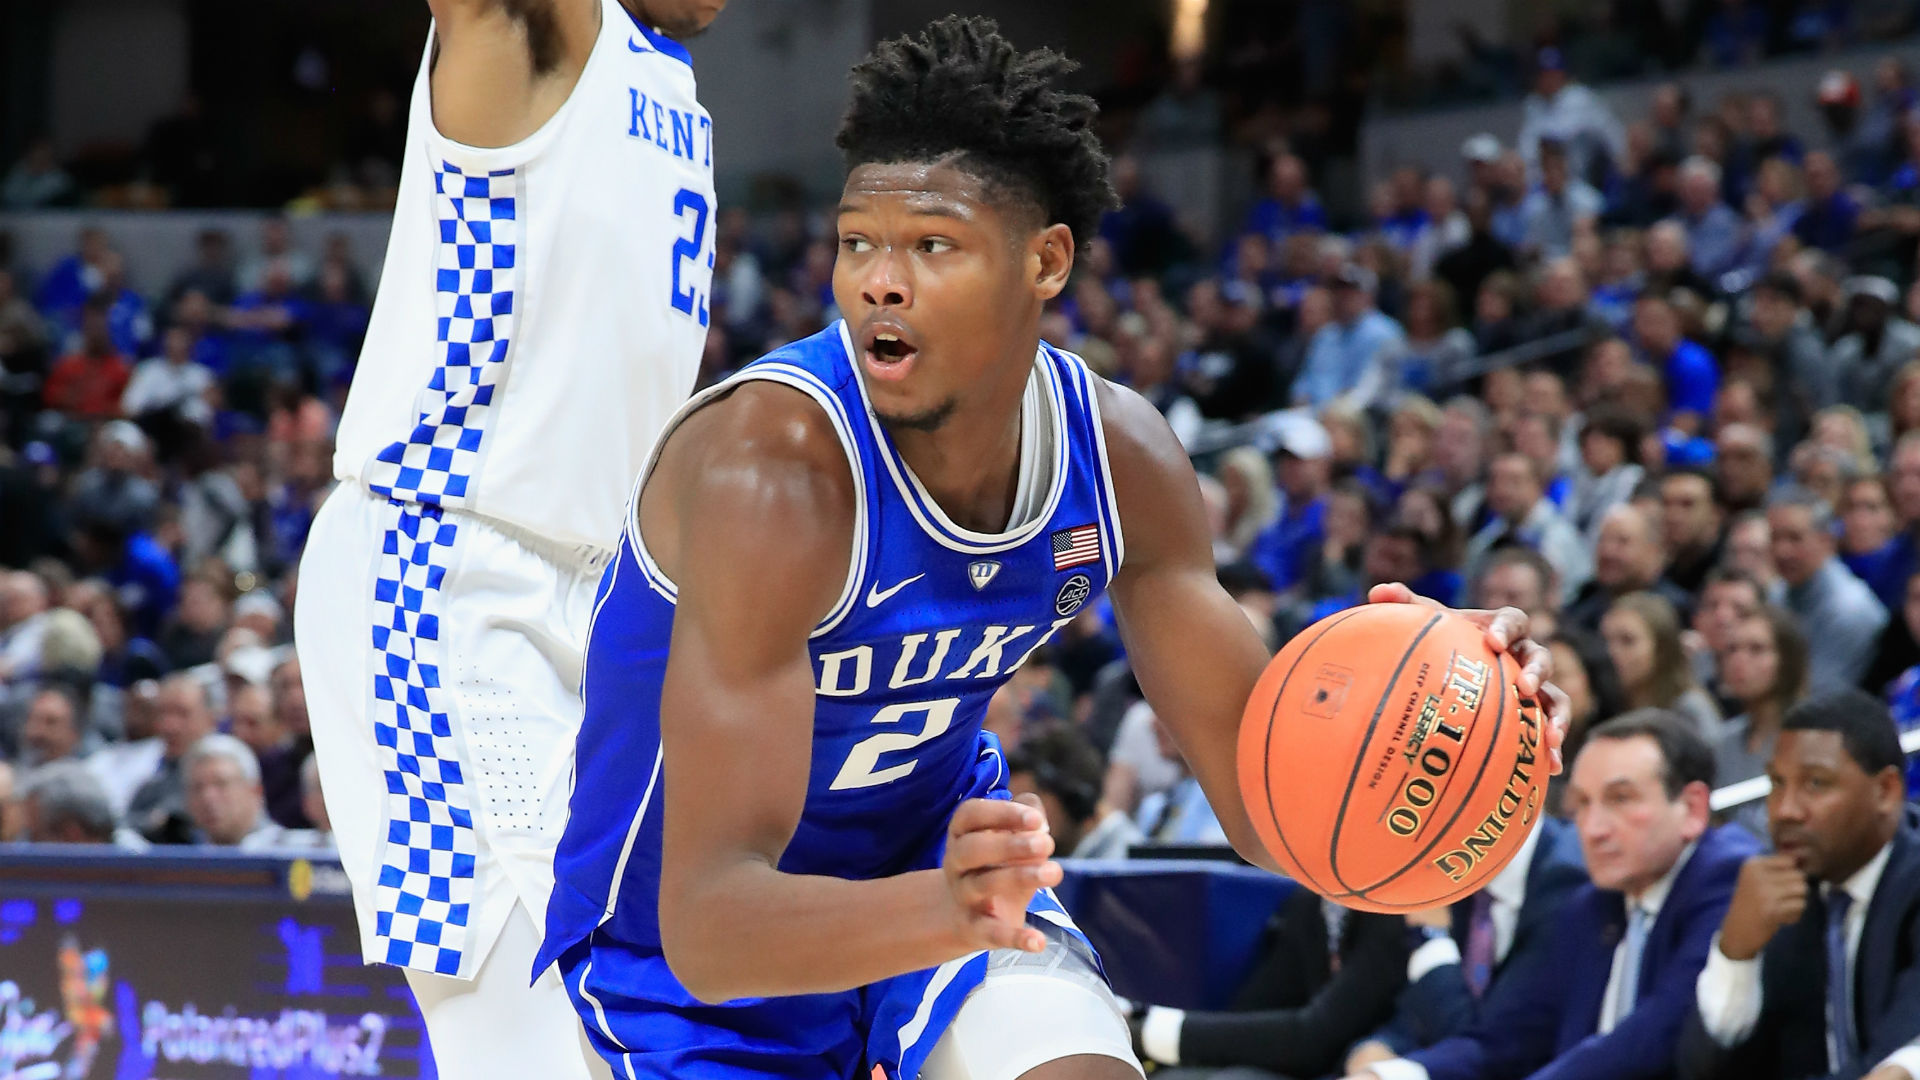 NBA Draft 2019: Cam Reddish scouting report, strengths, weaknesses and player ...